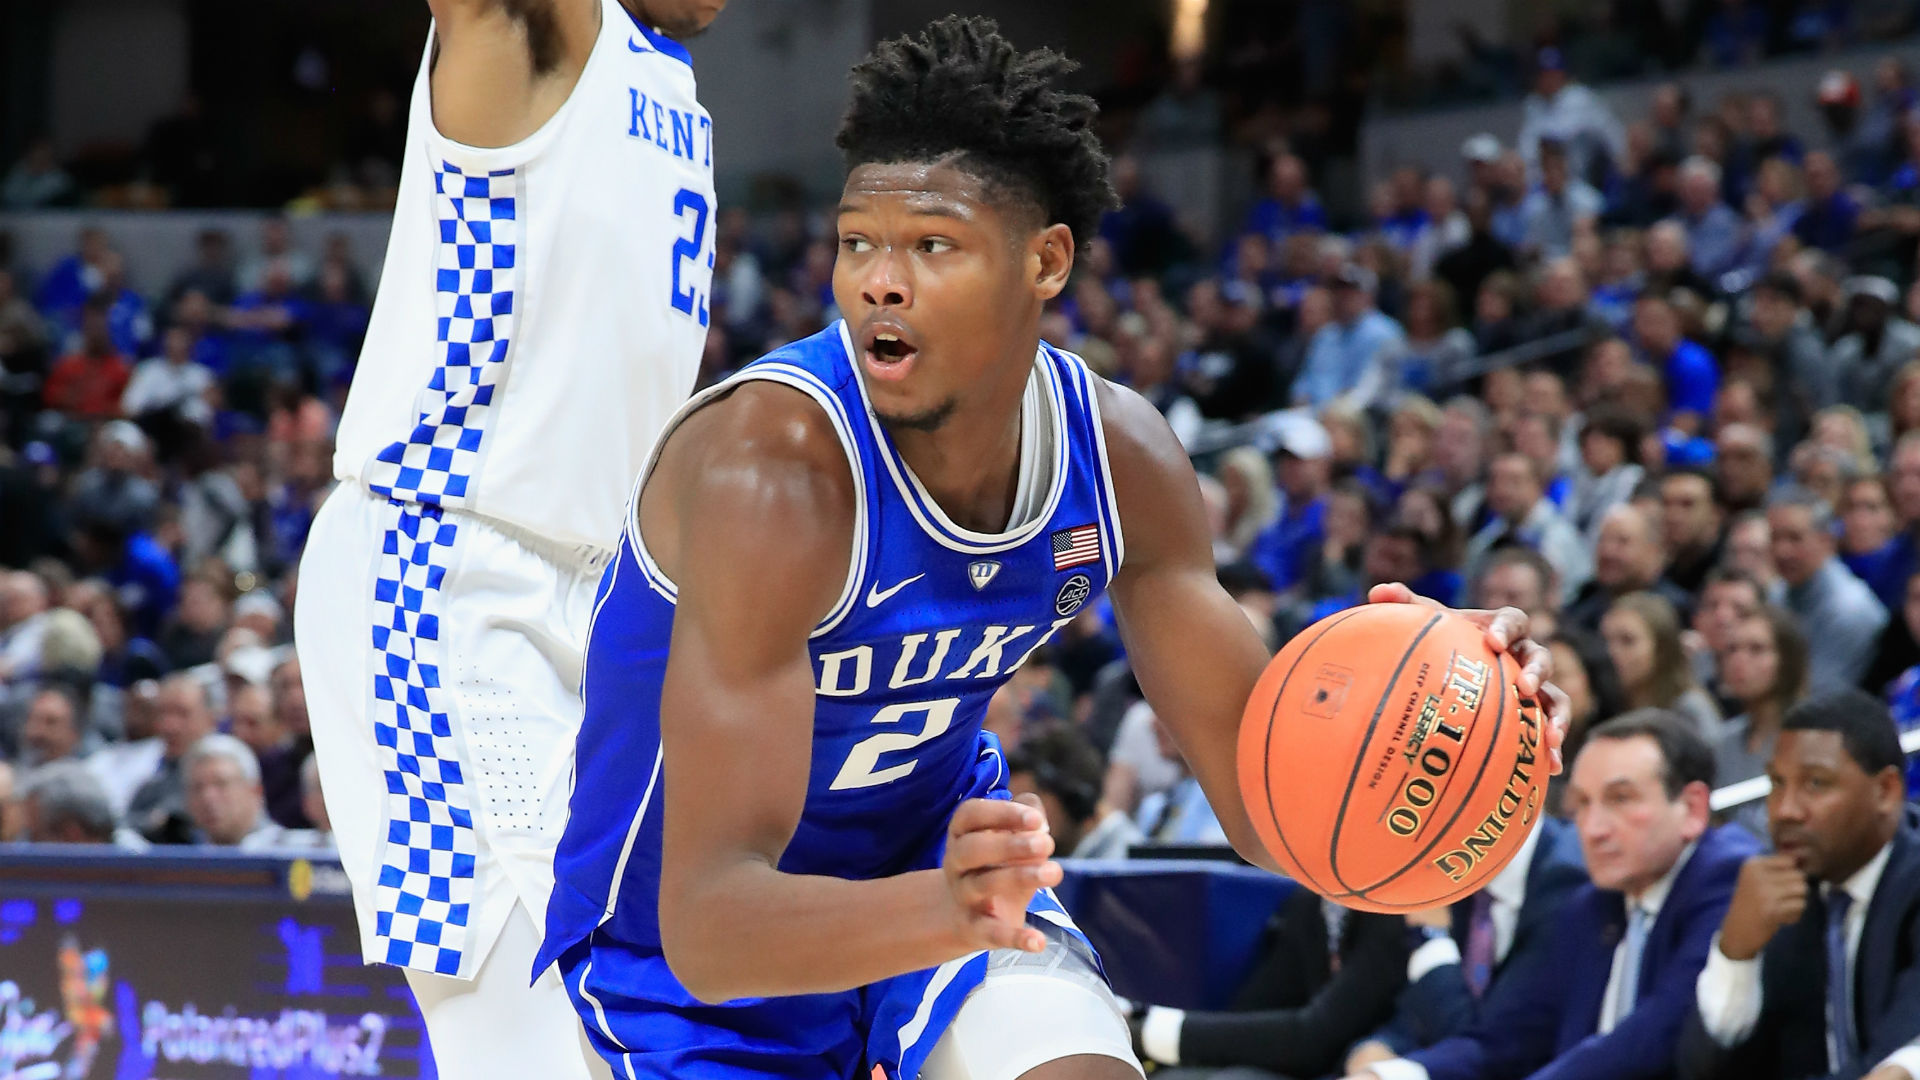 NBA Draft 2019: Cam Reddish scouting report, strengths, weaknesses and player ...